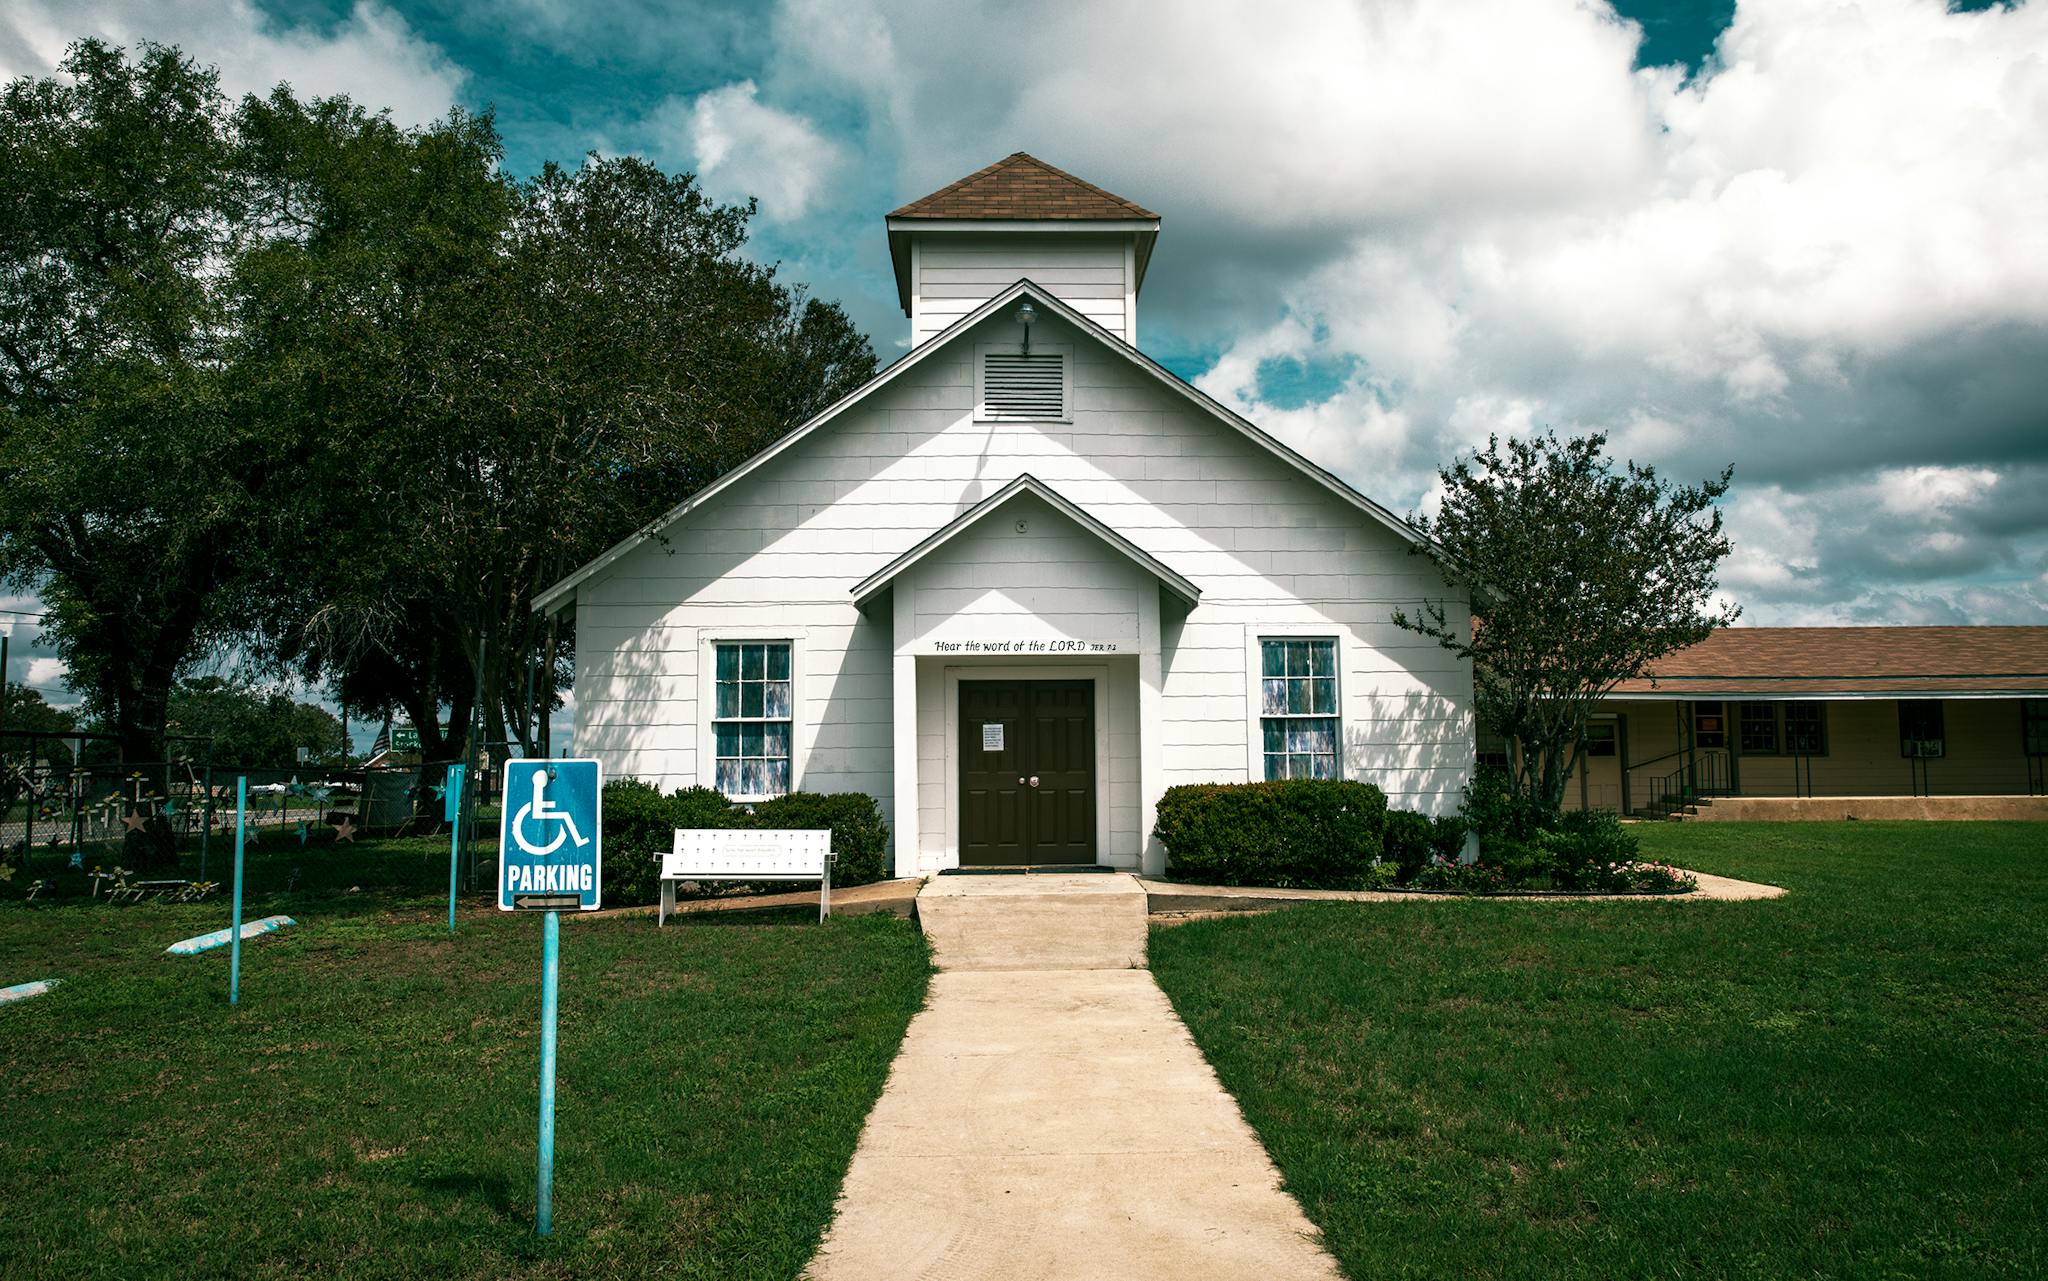 The First Baptist church where Stephen Willeford stopped a shooting in Sutherland Springs.